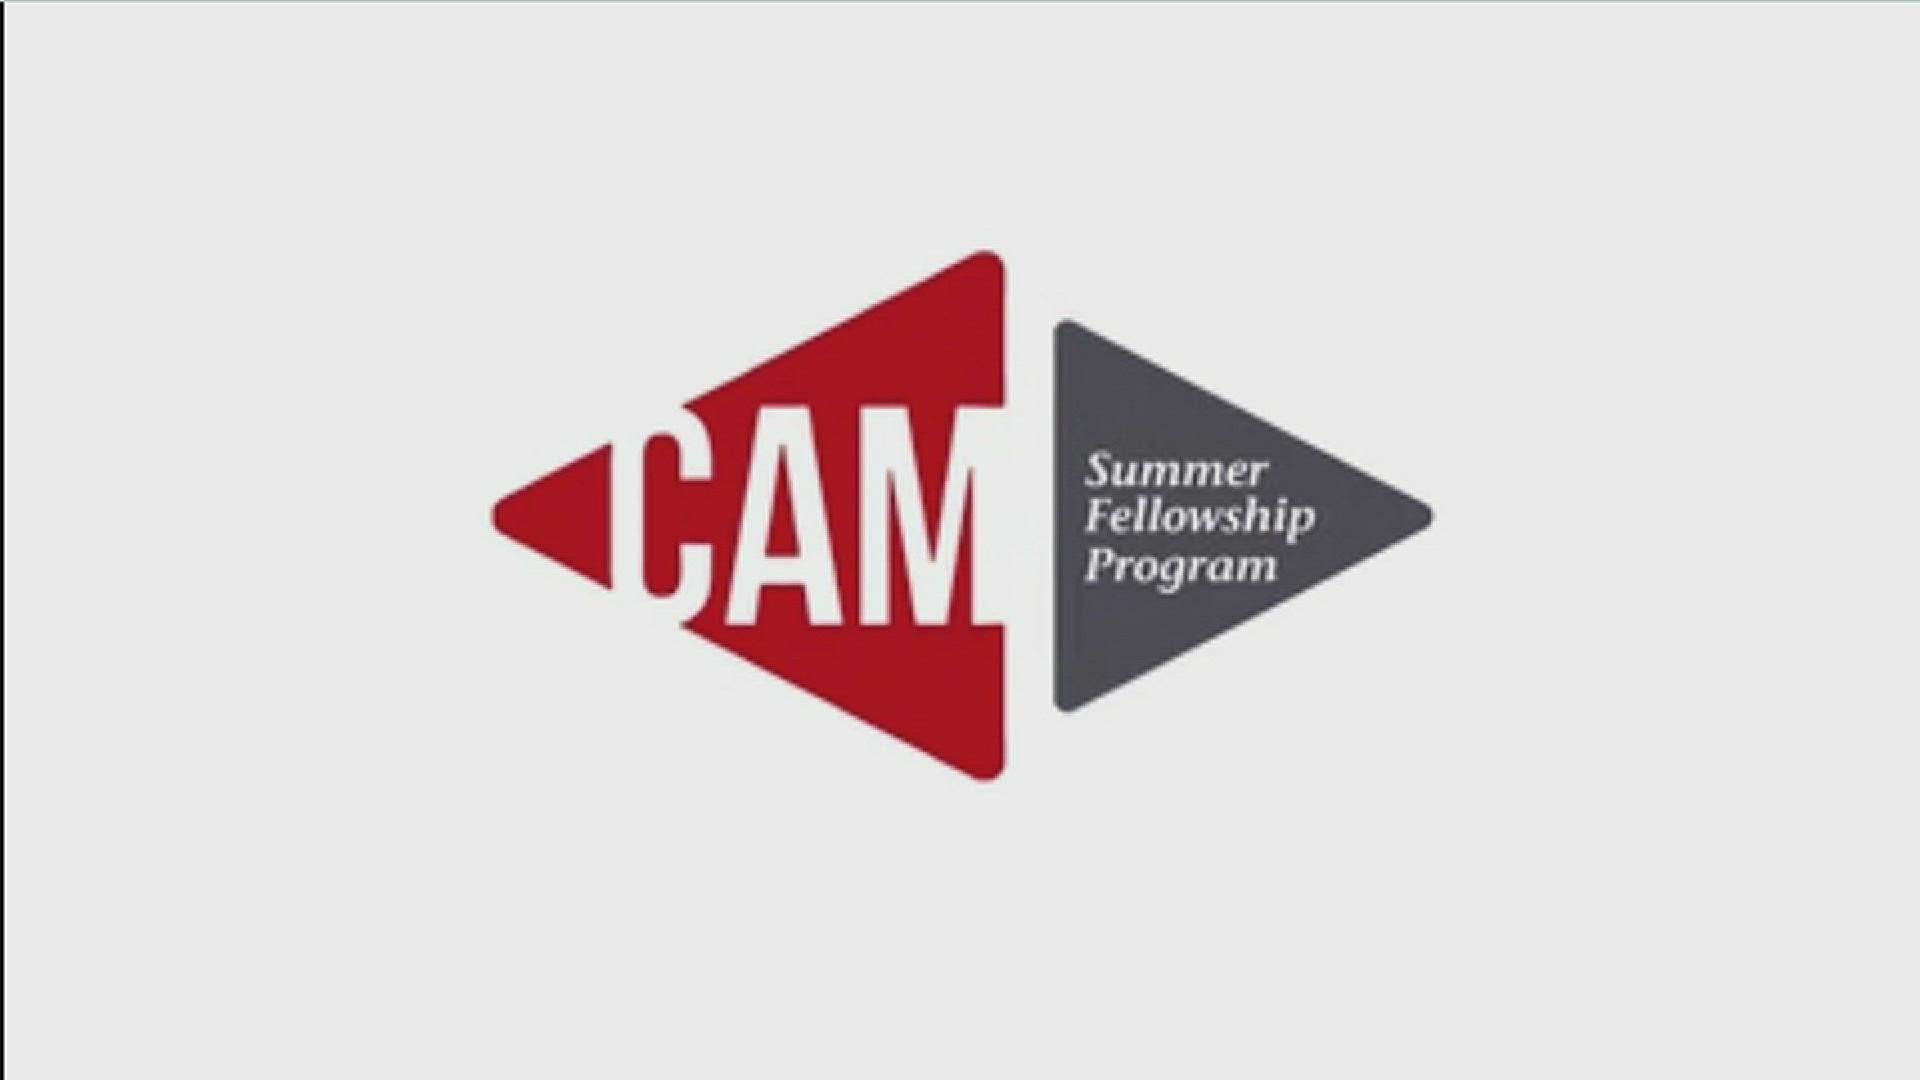 The CAM Summer Fellowship Program application process is open to Memphis-area students currently in 10th and 11th grades seeking careers in the arts